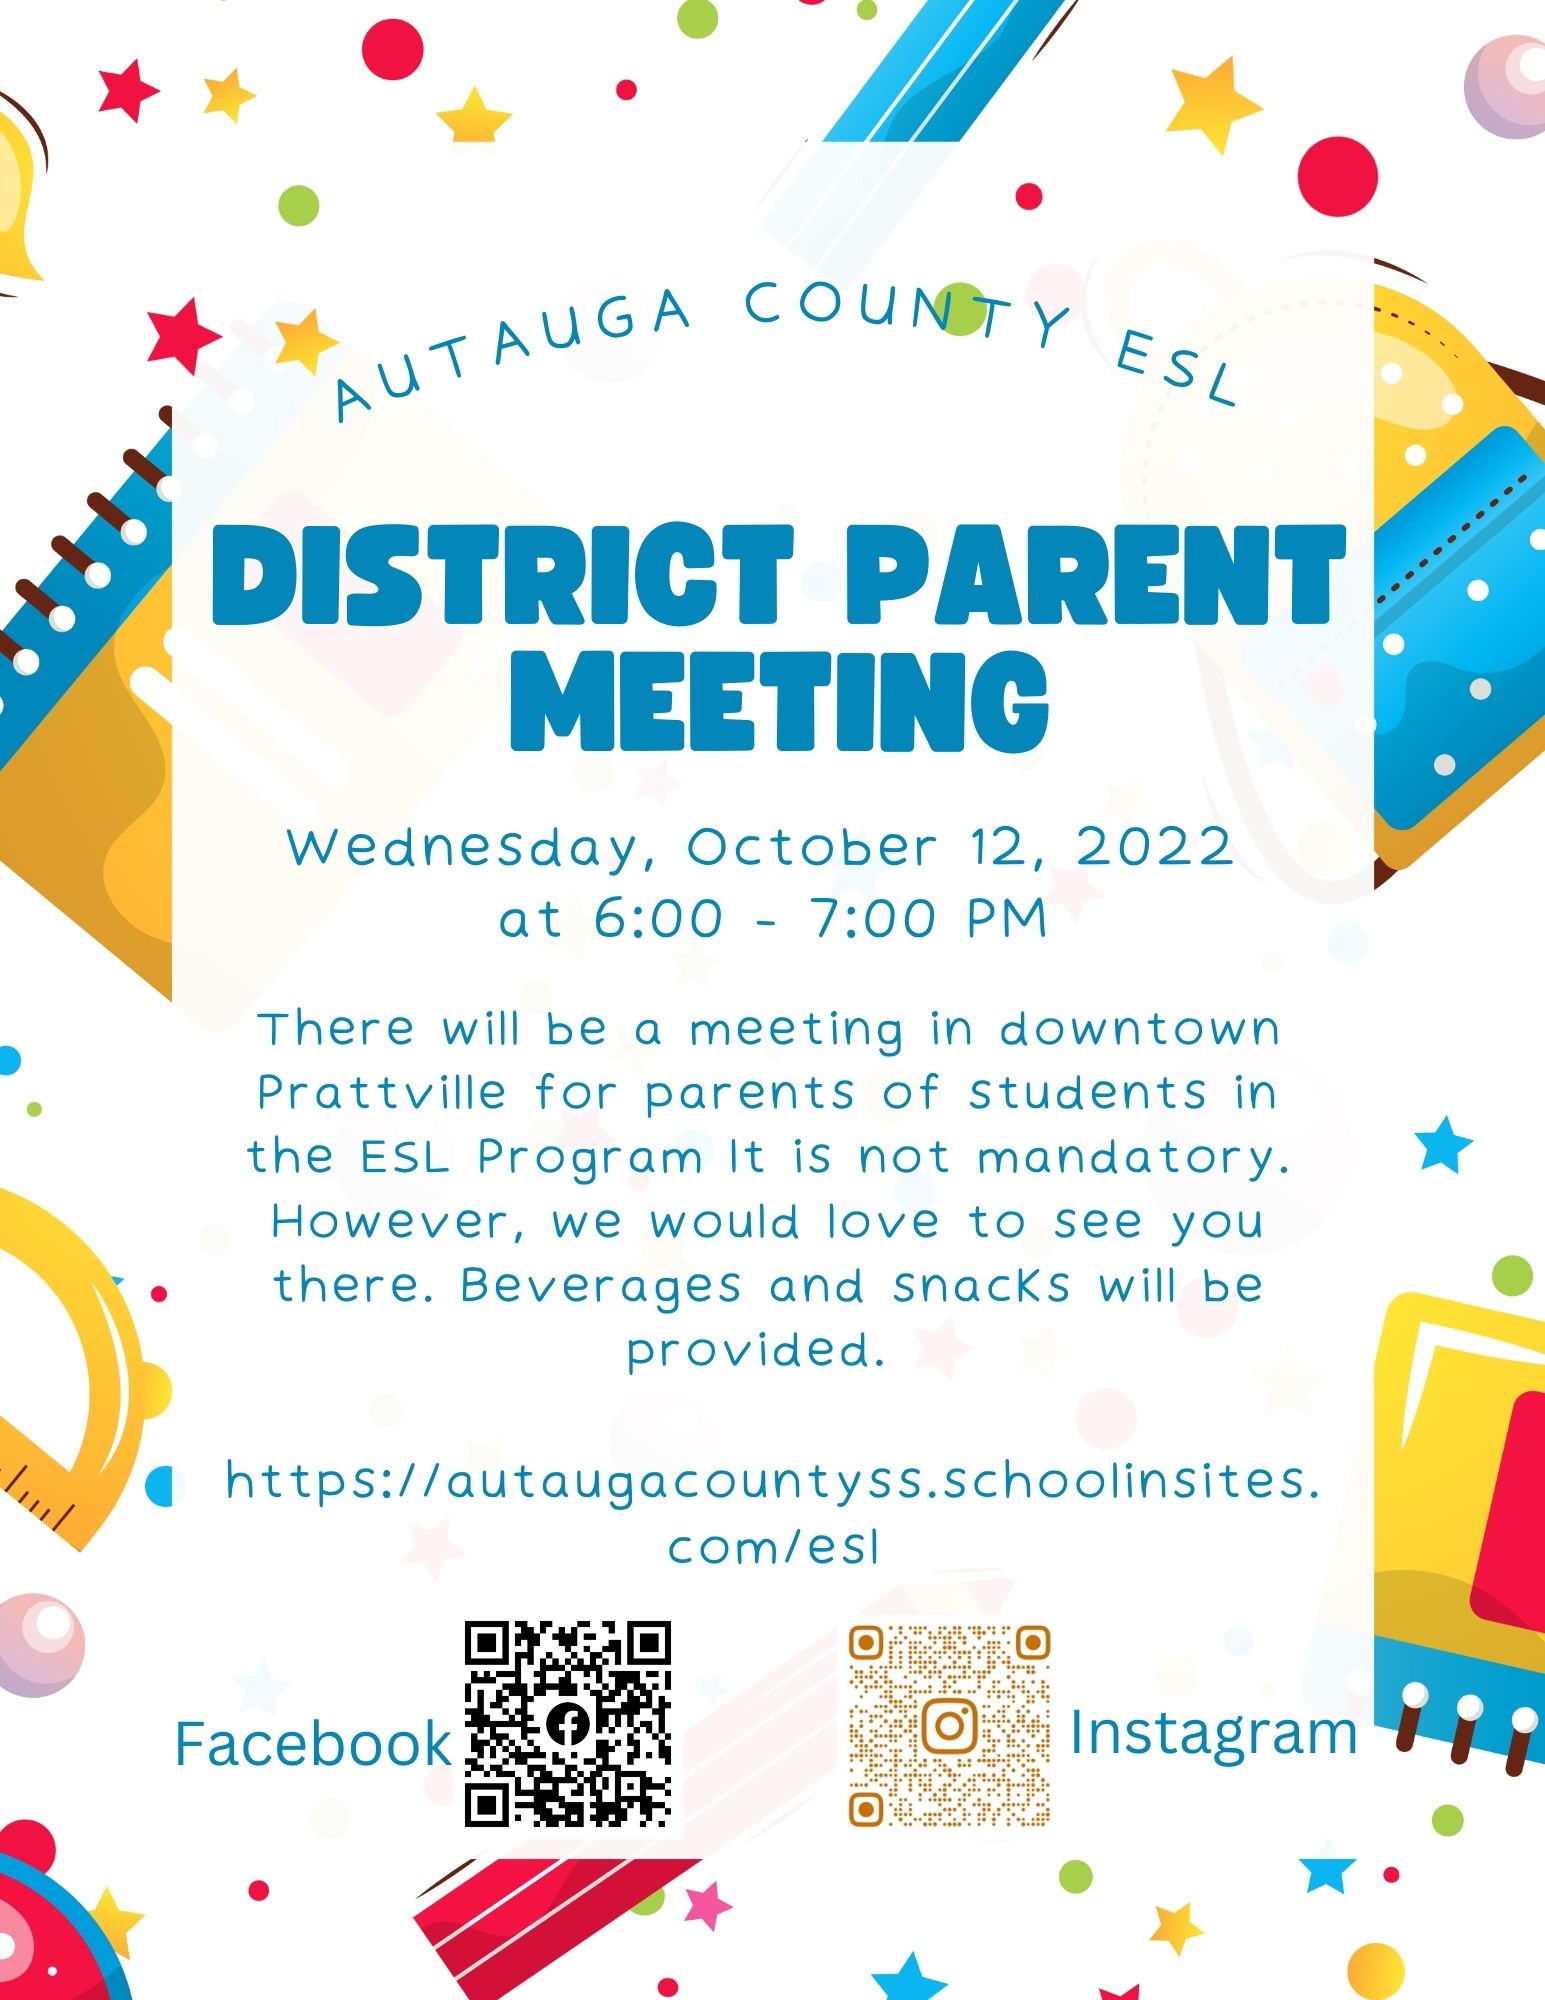 Autauga County ESL District Parent Meeting Wednesday, October 12, 2022 6PM to 7PM   There will be a meeting in downtown Prattville for parents of students in the ESL Program.  It is not mandatory. However, we would love to see you there.  Beverages and snacks will be provided.  https://autaugacountyss.schoolinsites.com/esl